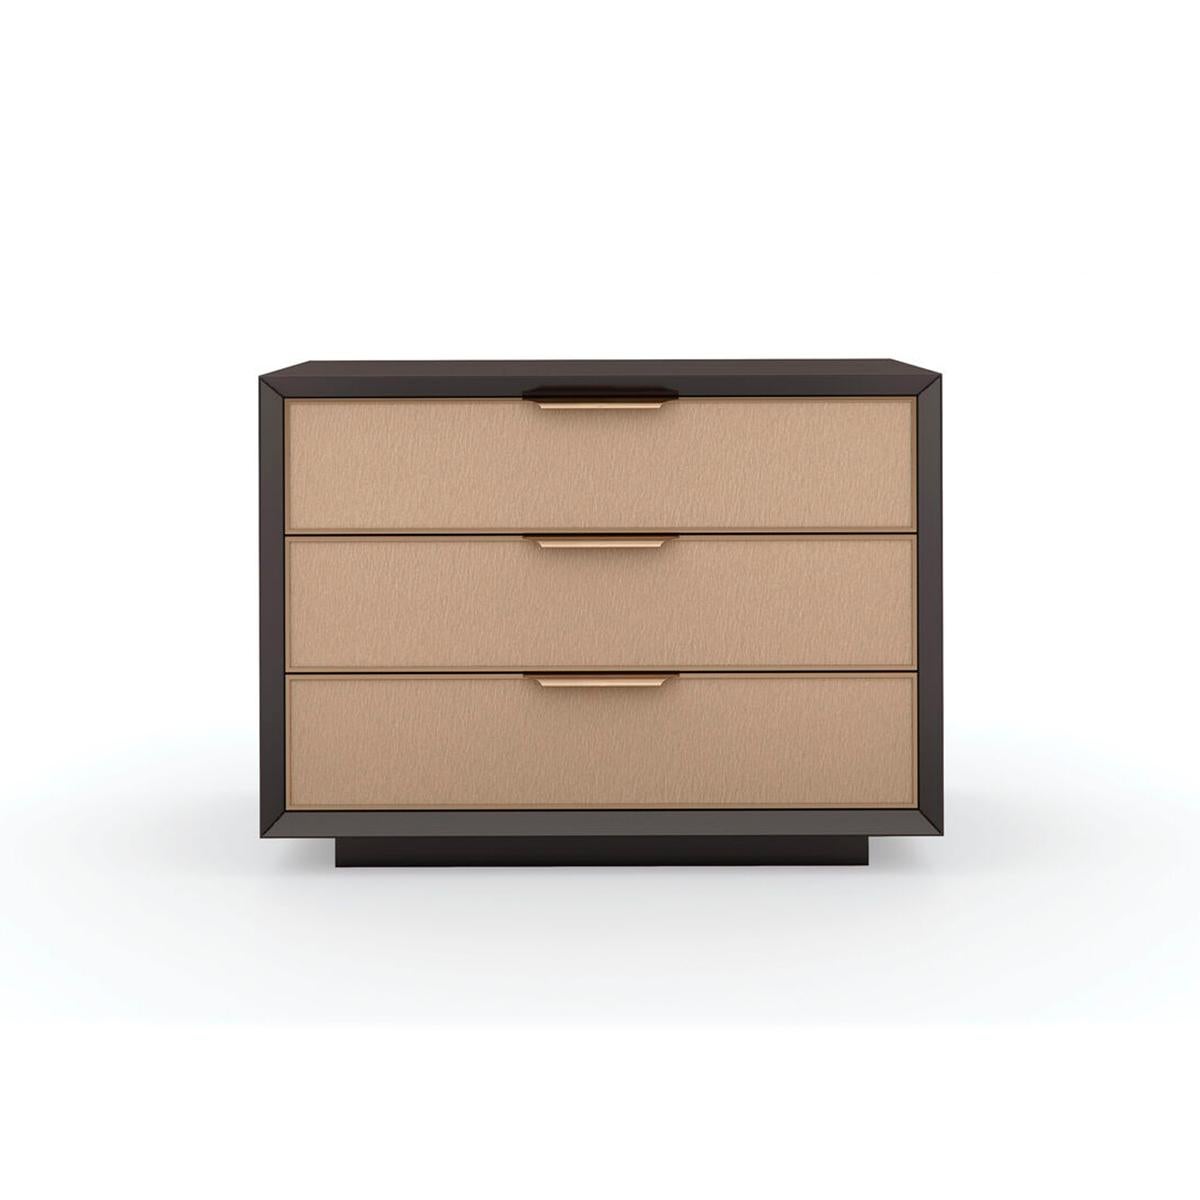 Mid Century Modern Three Drawer Nightstand, a clean-lined nightstand merges minimalism with elements of mid-century modern design. Framed in a contrasting Dark Chocolate finish, three soft-closing drawers feature textured vinyl fronts, embossed with